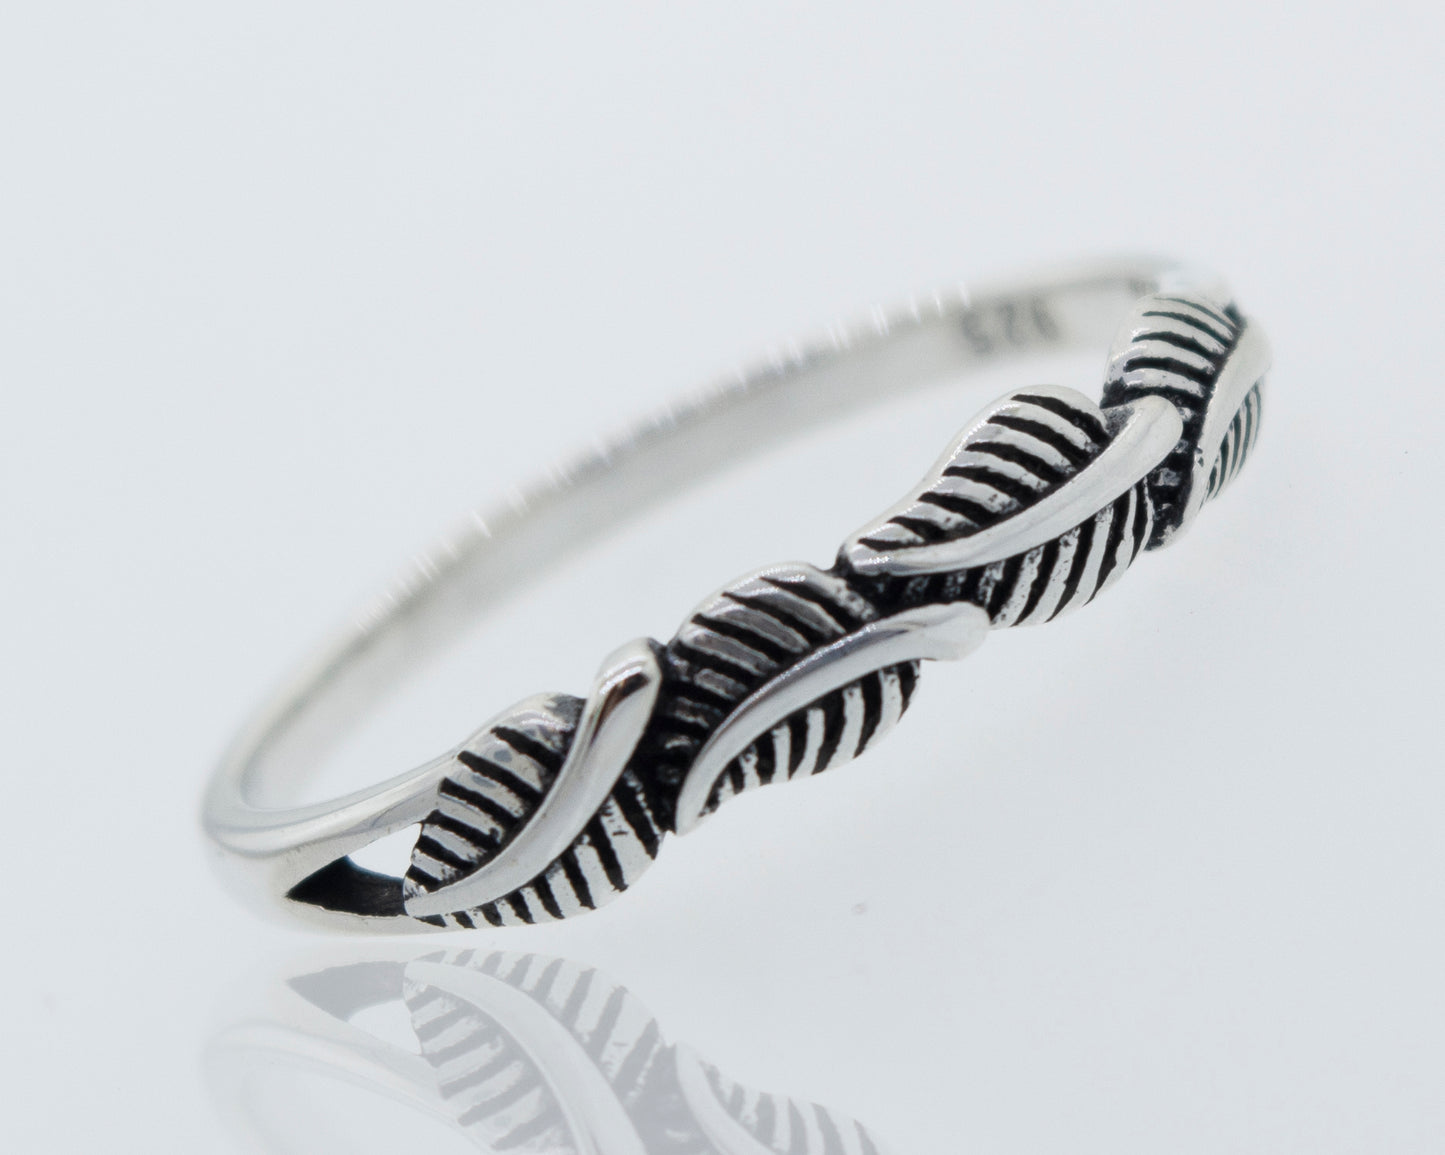 A Four Leaves Silver Ring with a horizontal leaf design made by Super Silver.